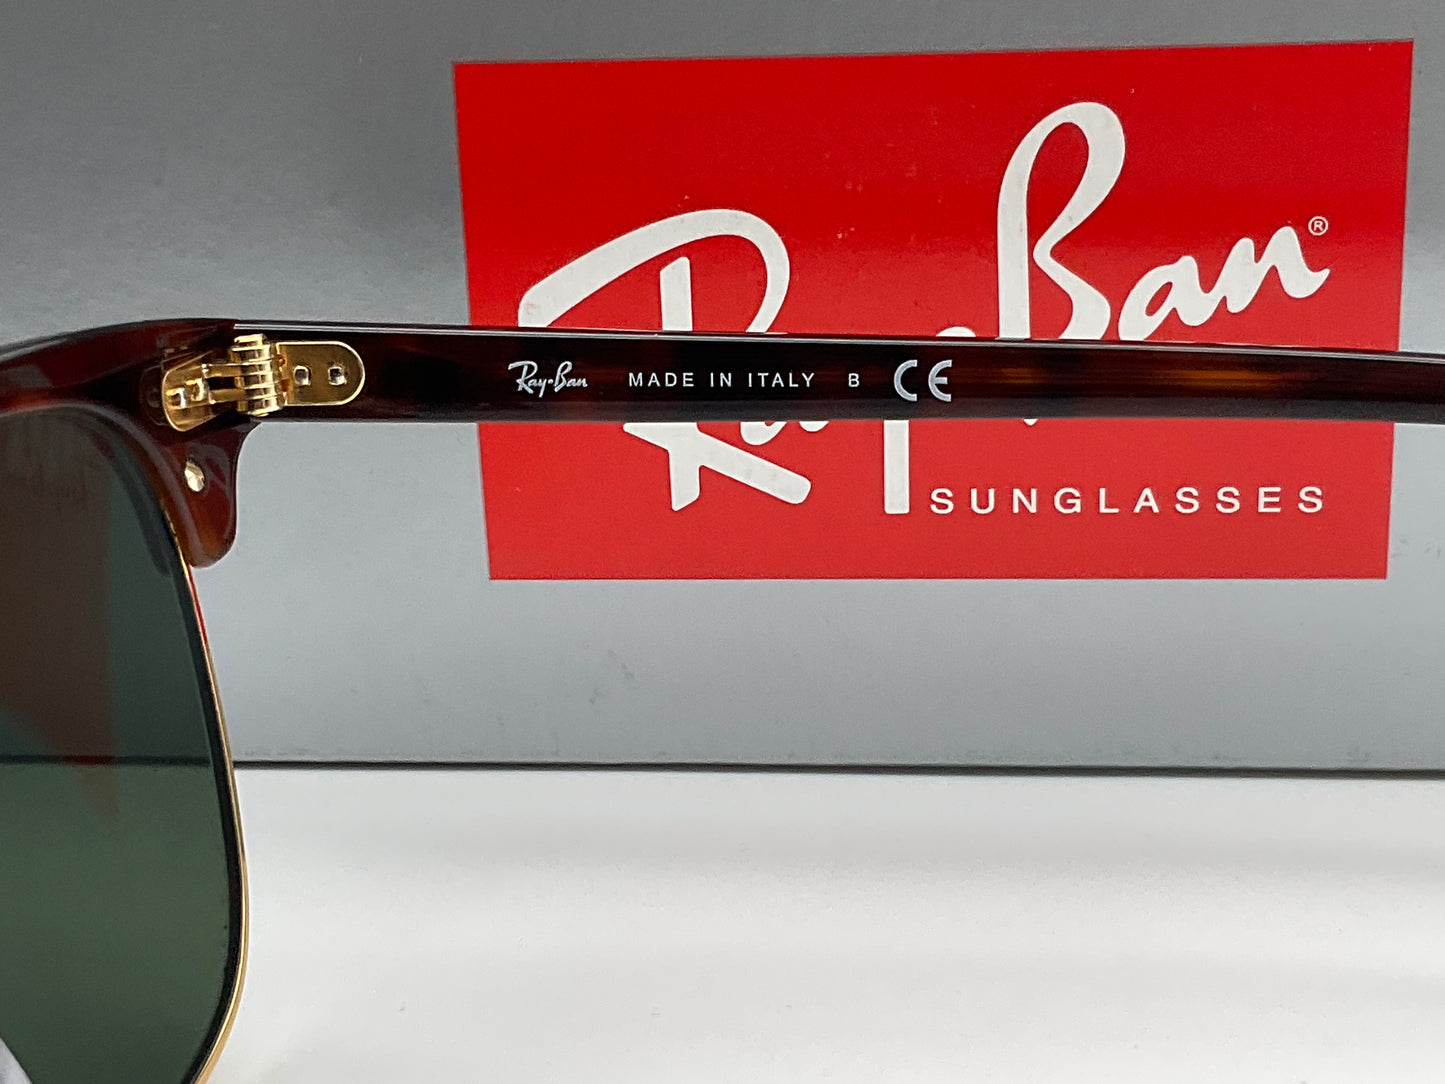 Ray Ban Clubmaster Tortoise 49 mm Sunglasses RB3016-W0366 Made in Italy